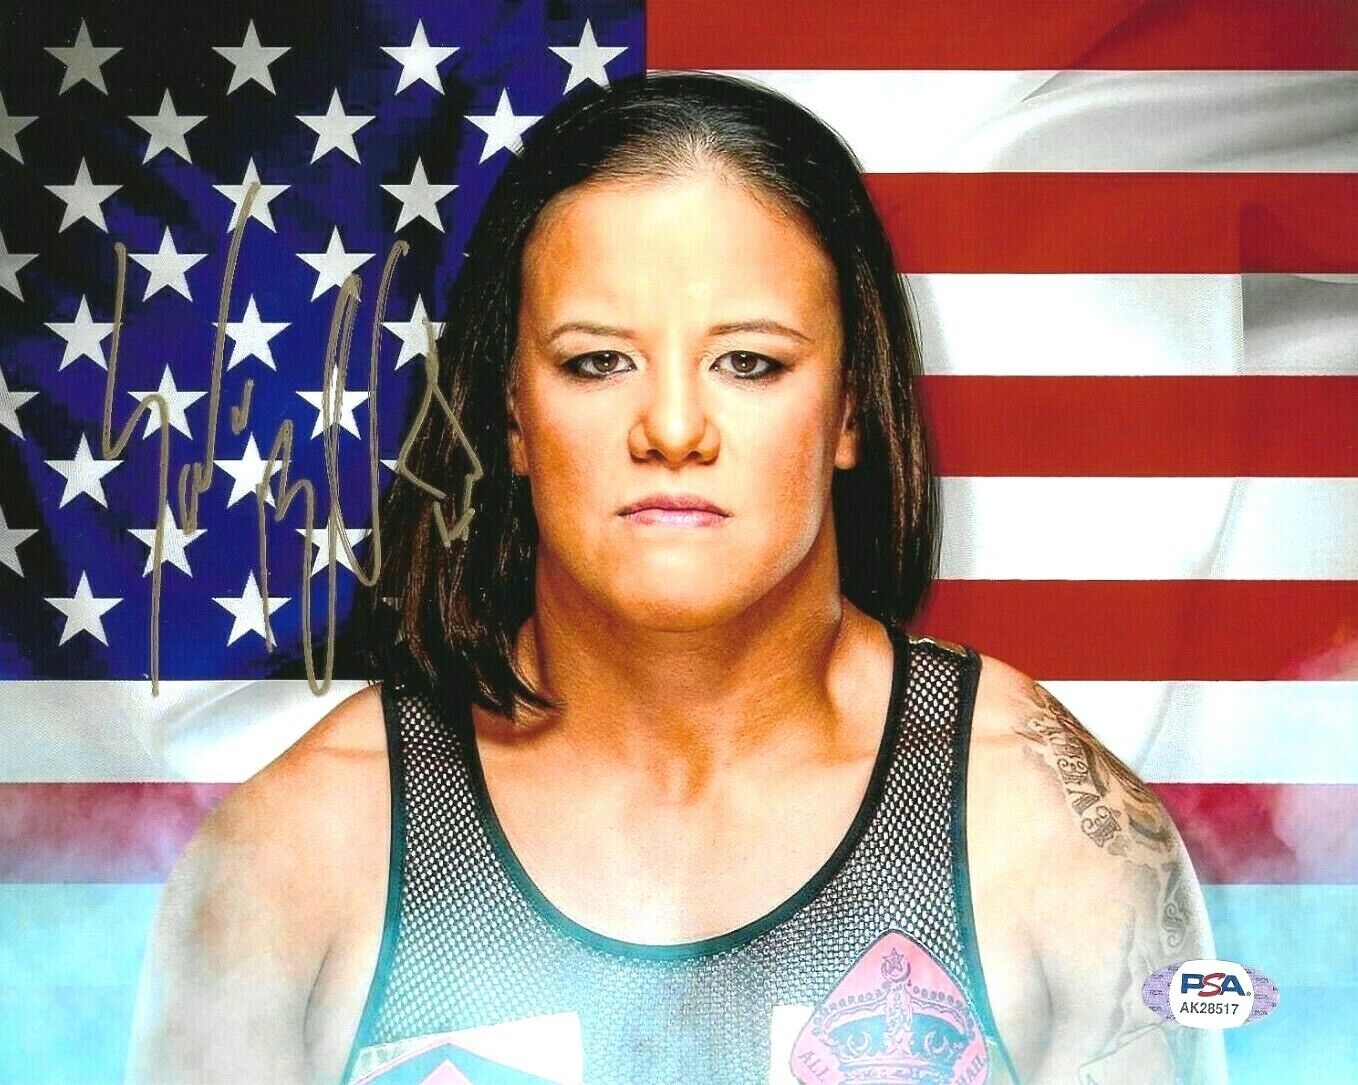 WWE SHAYNA BASZLER HAND SIGNED AUTOGRAPHED 8X10 Photo Poster painting WITH PROOF & PSA COA 3